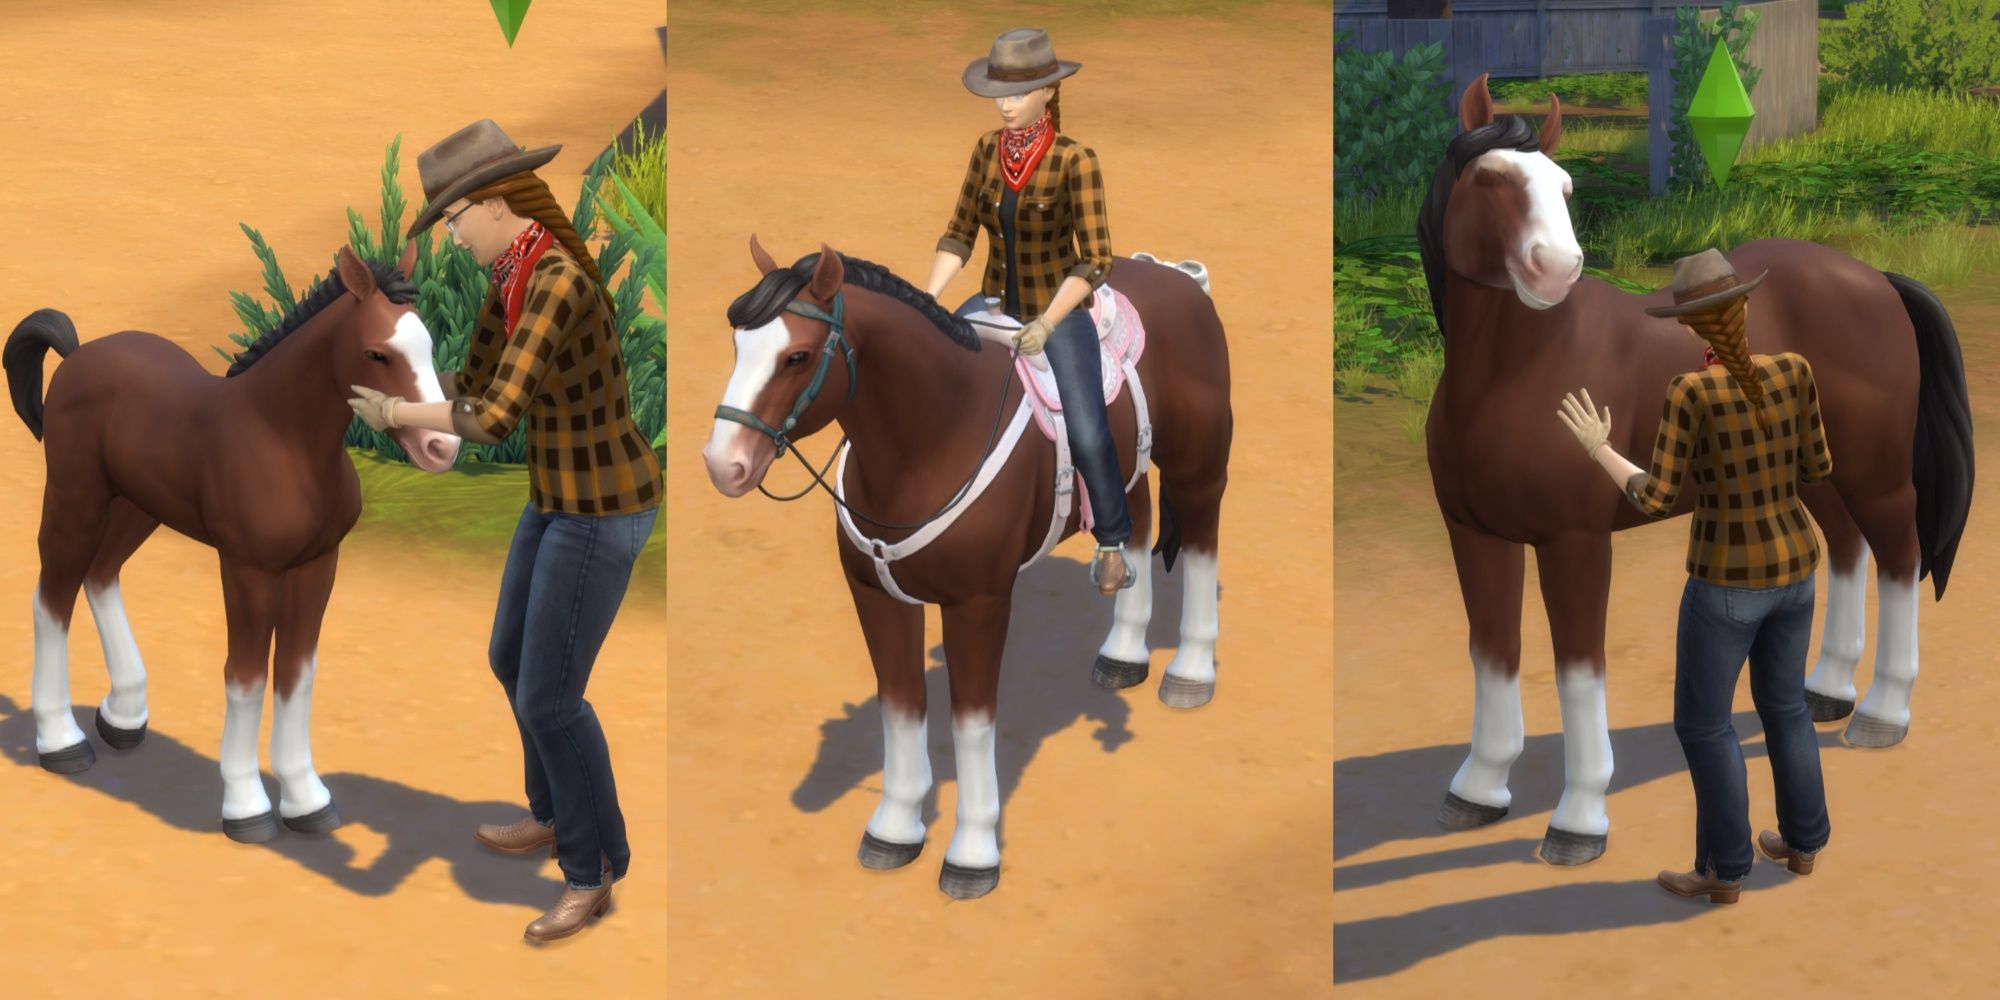 The three horse ages--foal, adult, and elder--in the Sims 4, from left to right.